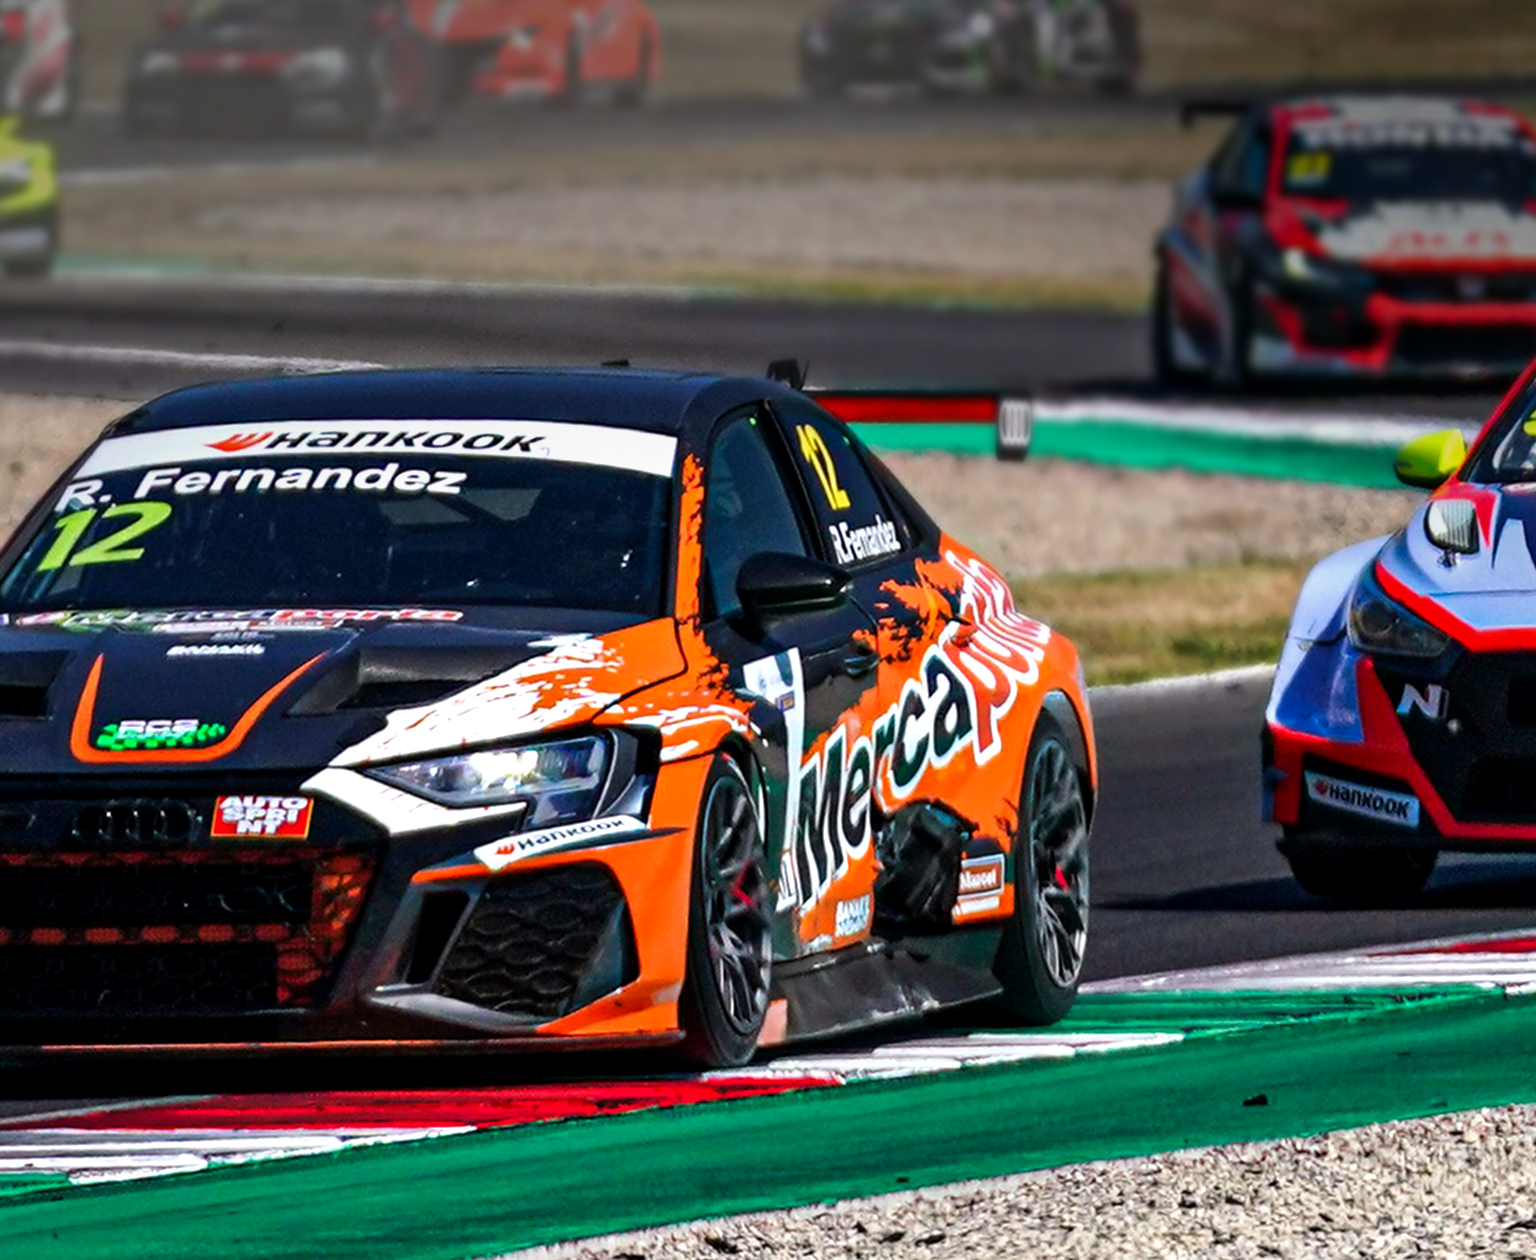 tcr italy information